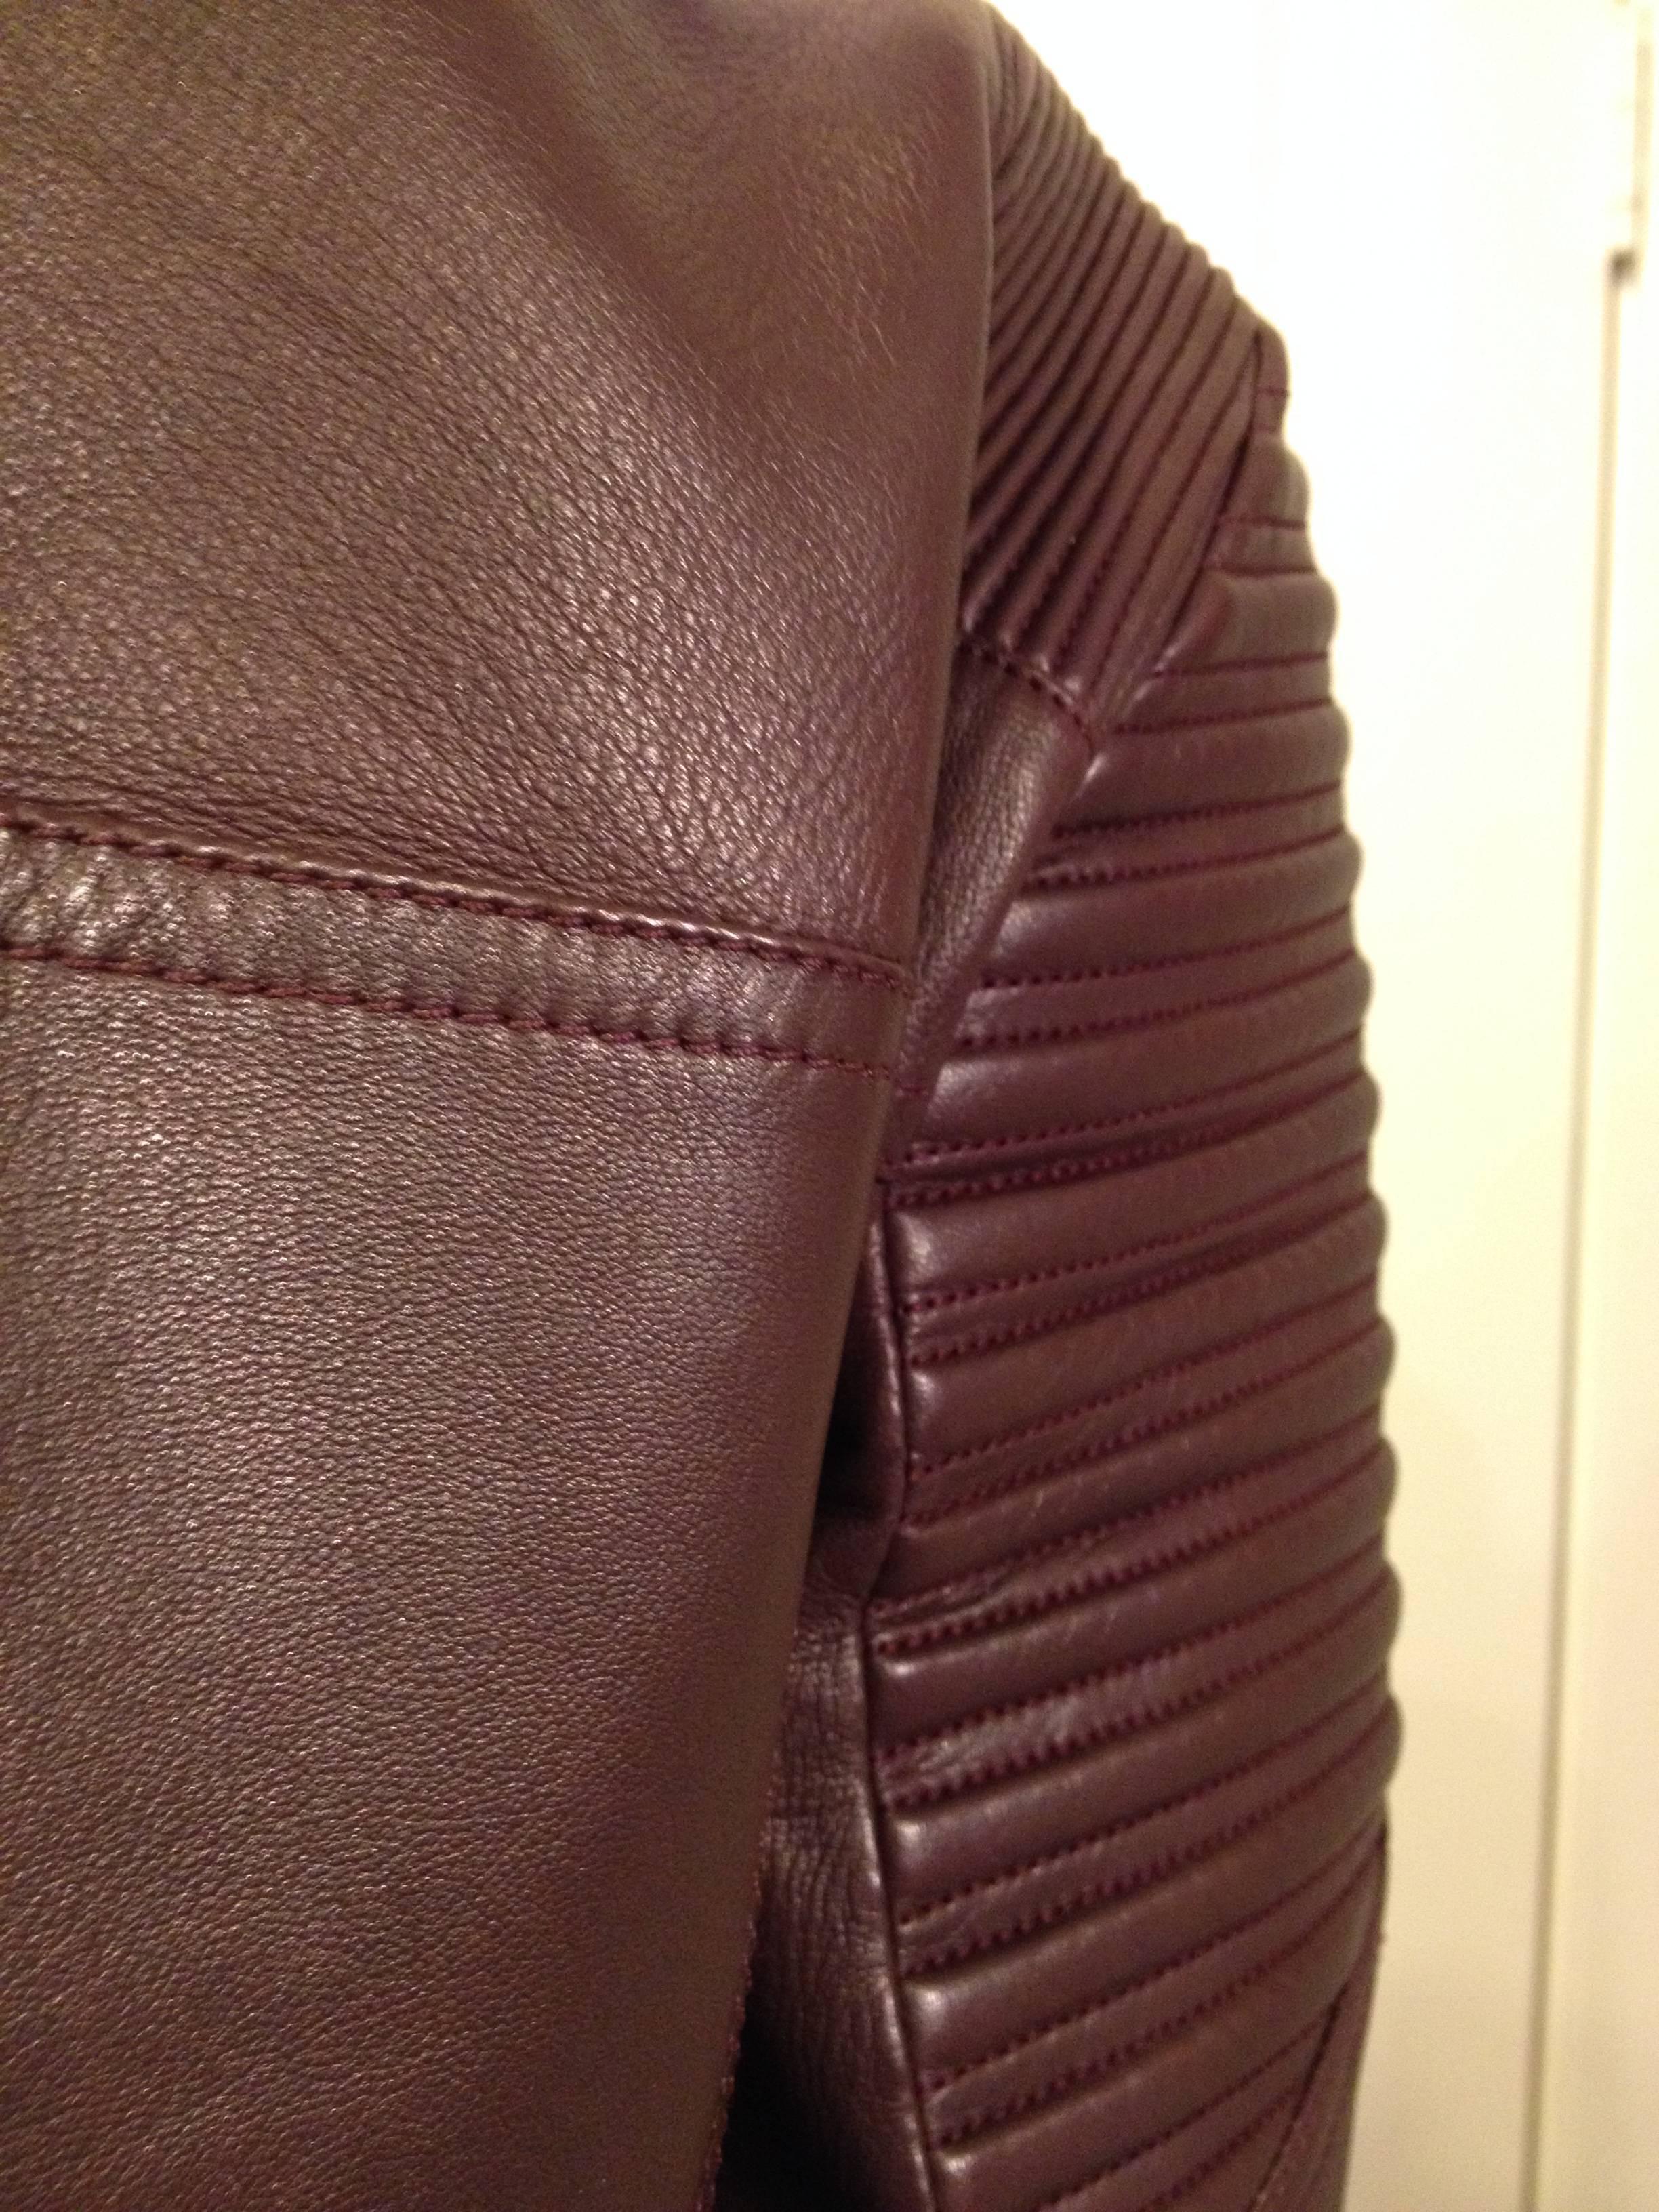 Women's Givenchy Burgundy Ribbed Leather Motorcycle Jacket Size 38 (6) For Sale